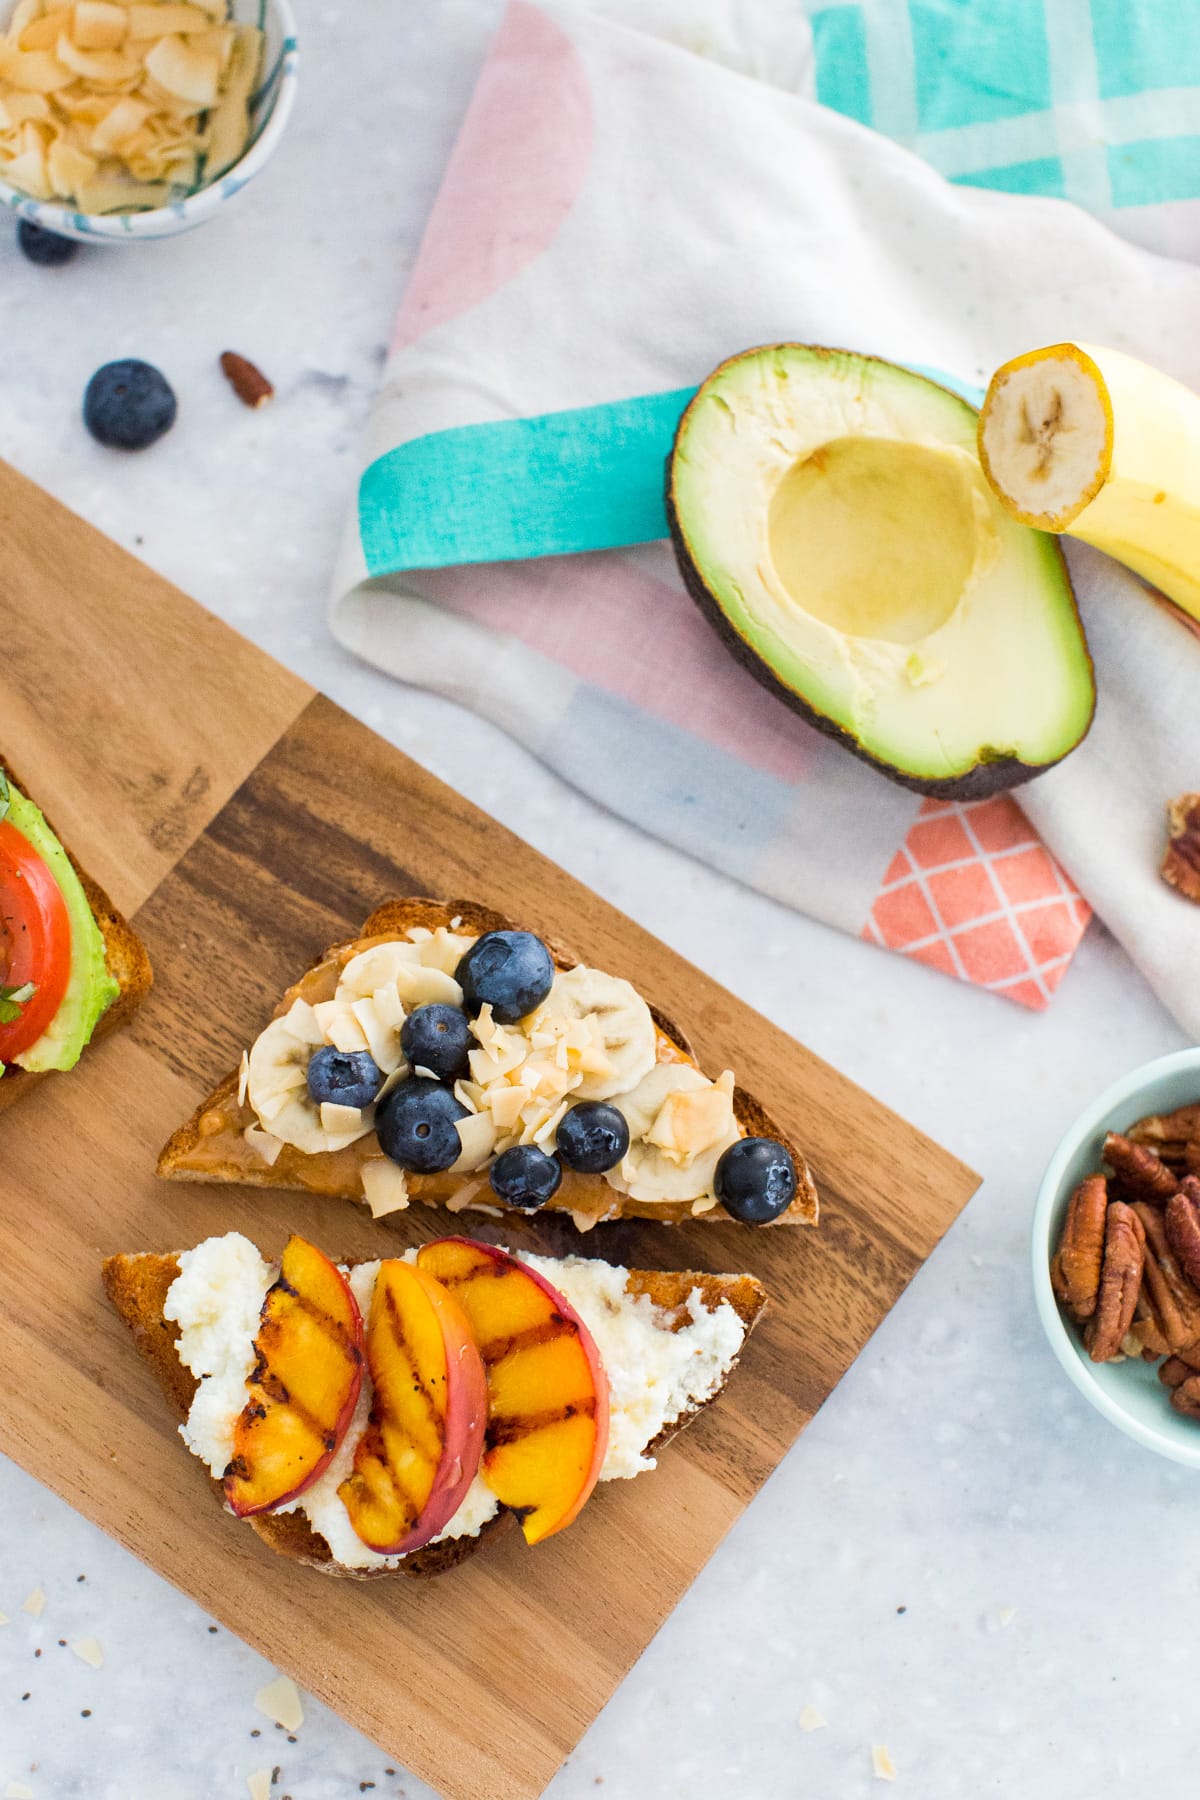 6 Simple Insta-Worthy Toast Combos by top Houston lifestyle blogger Ashley Rose of Sugar & Cloth #recipe #toast #instagram 